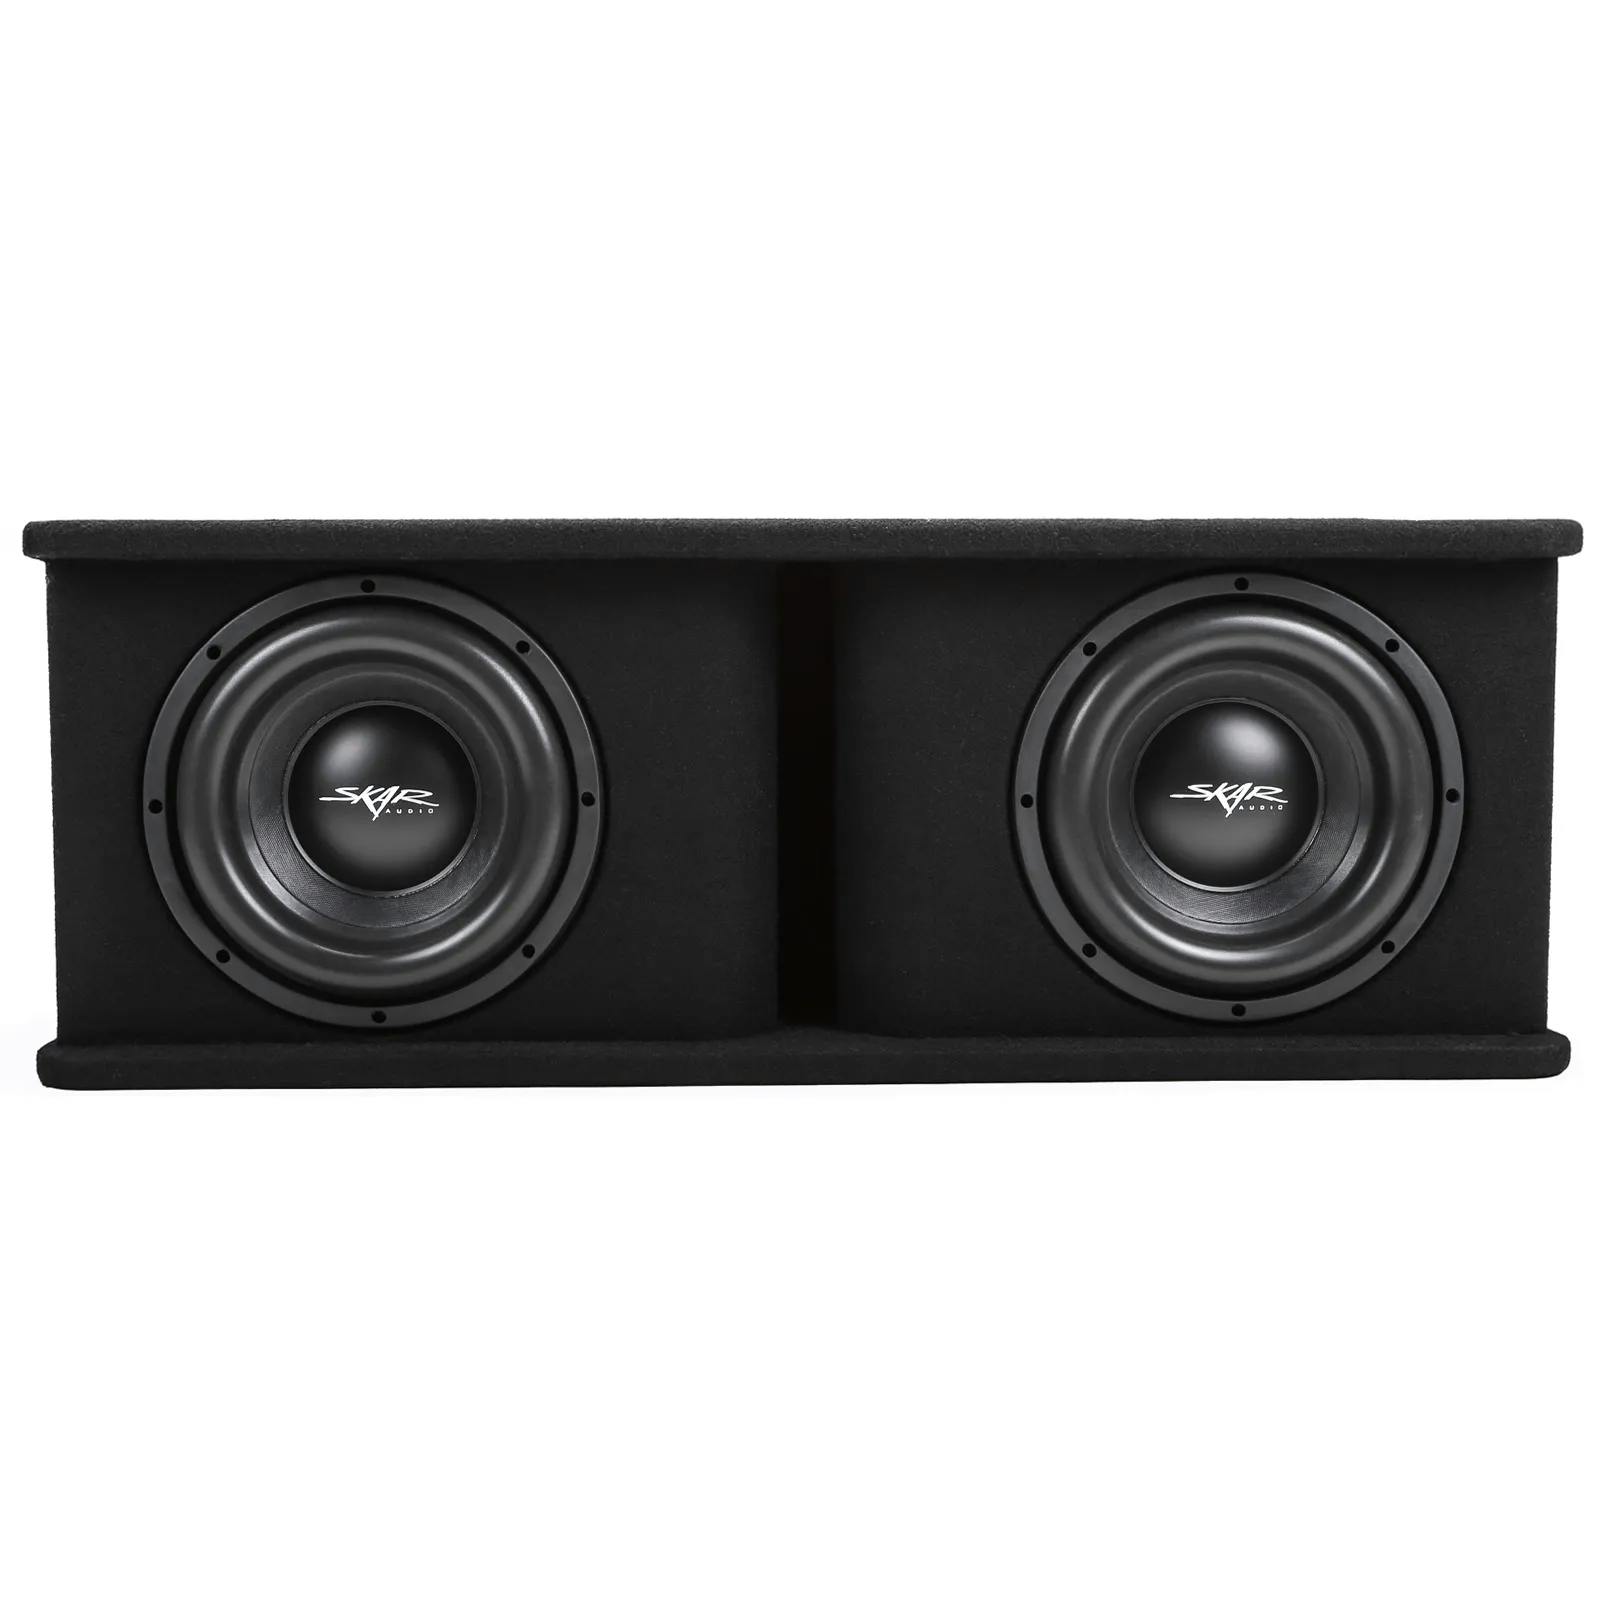 Featured Product Photo 1 for SDR-2X10D4 | Dual 10" 2,400 Watt SDR Series Loaded Vented Subwoofer Enclosure